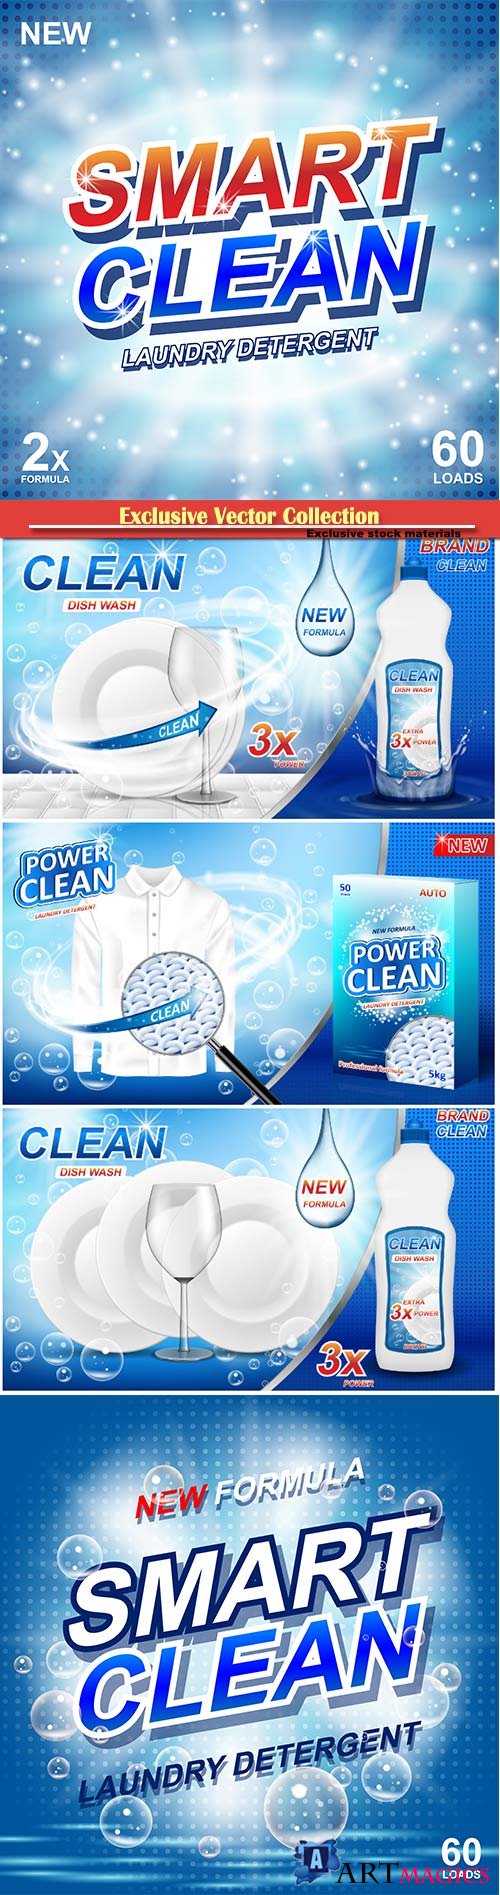 Realistic dishwashing template package design